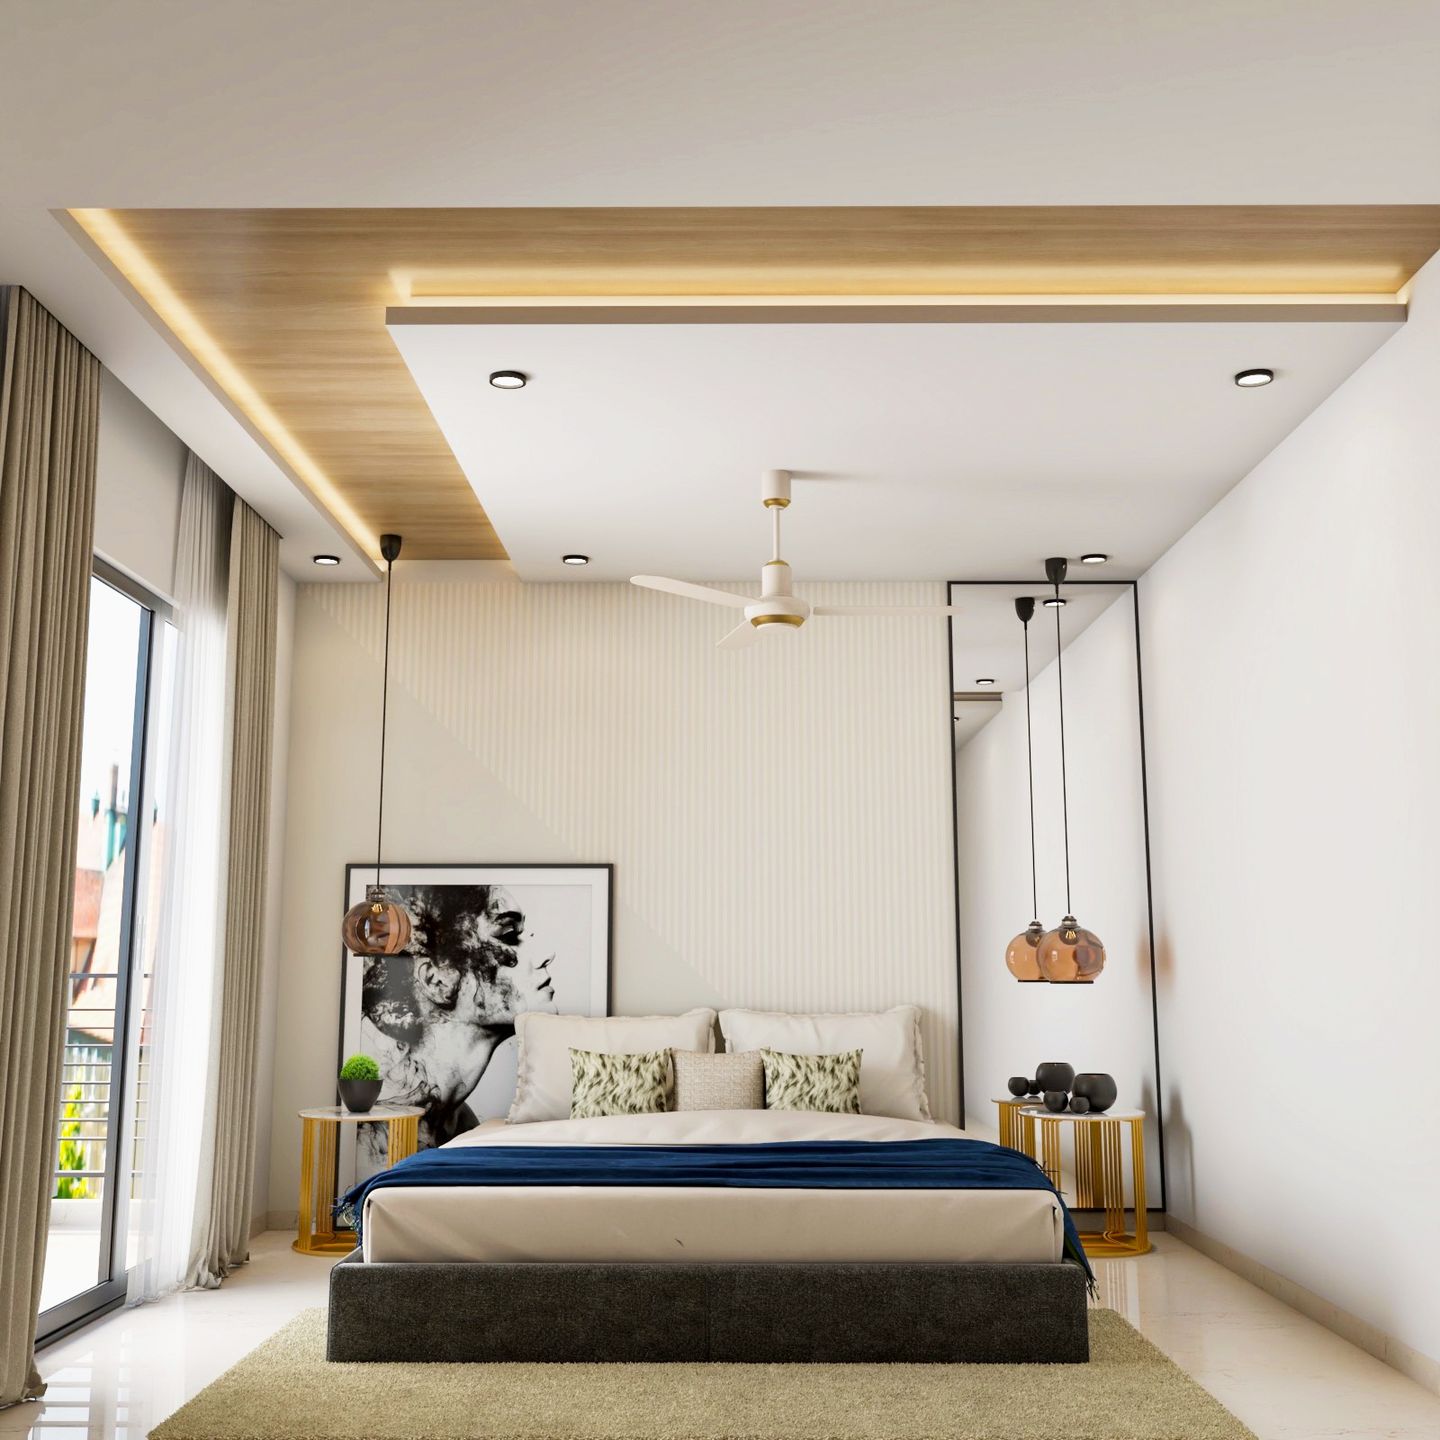 Wood And White POP Ceiling Design For Bedroom - Livspace